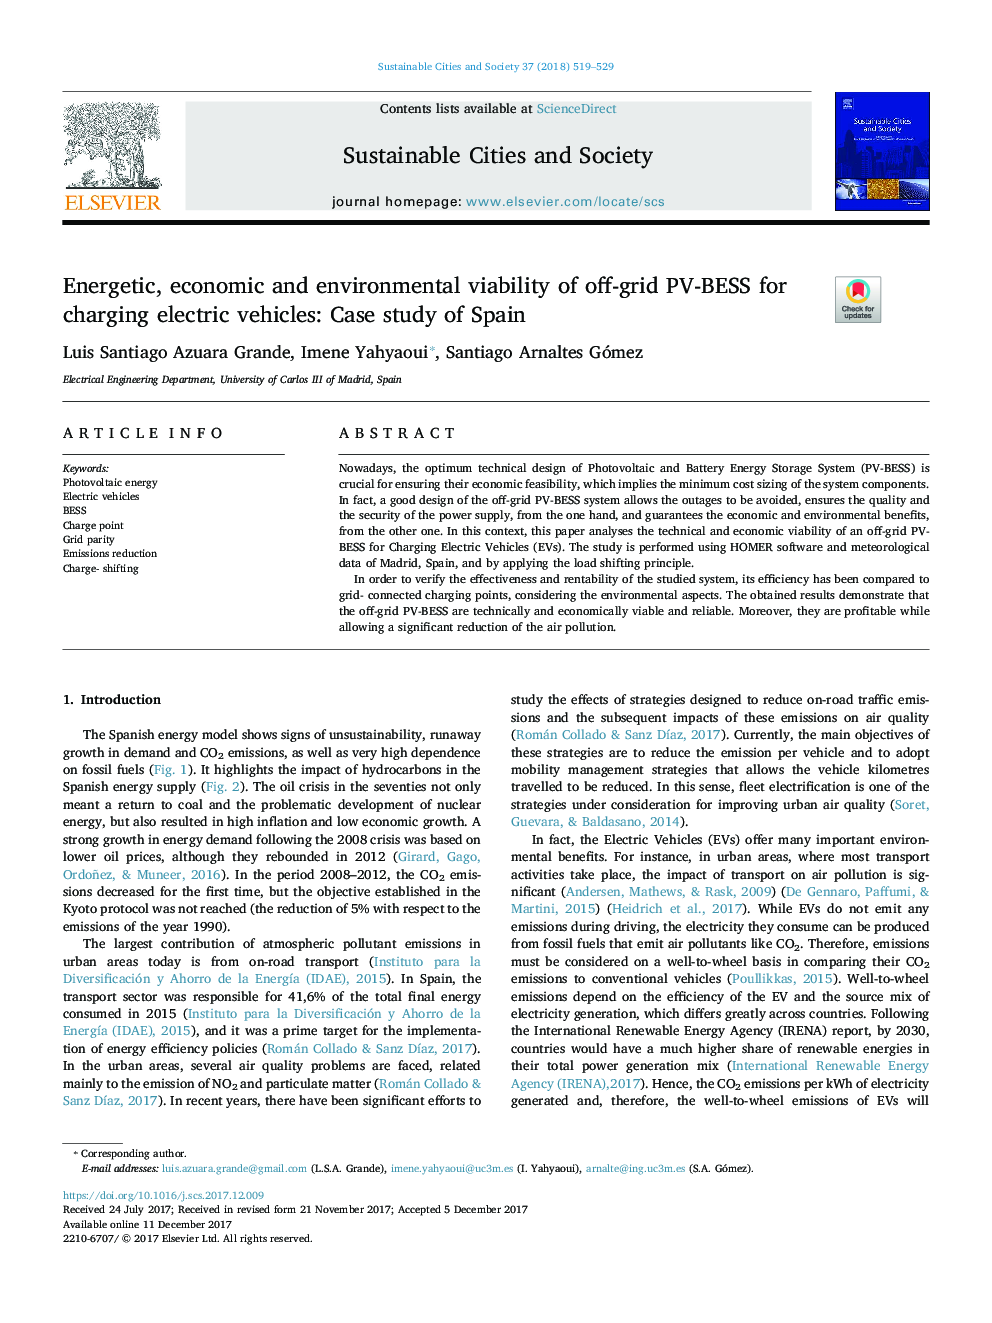 Energetic, economic and environmental viability of off-grid PV-BESS for charging electric vehicles: Case study of Spain